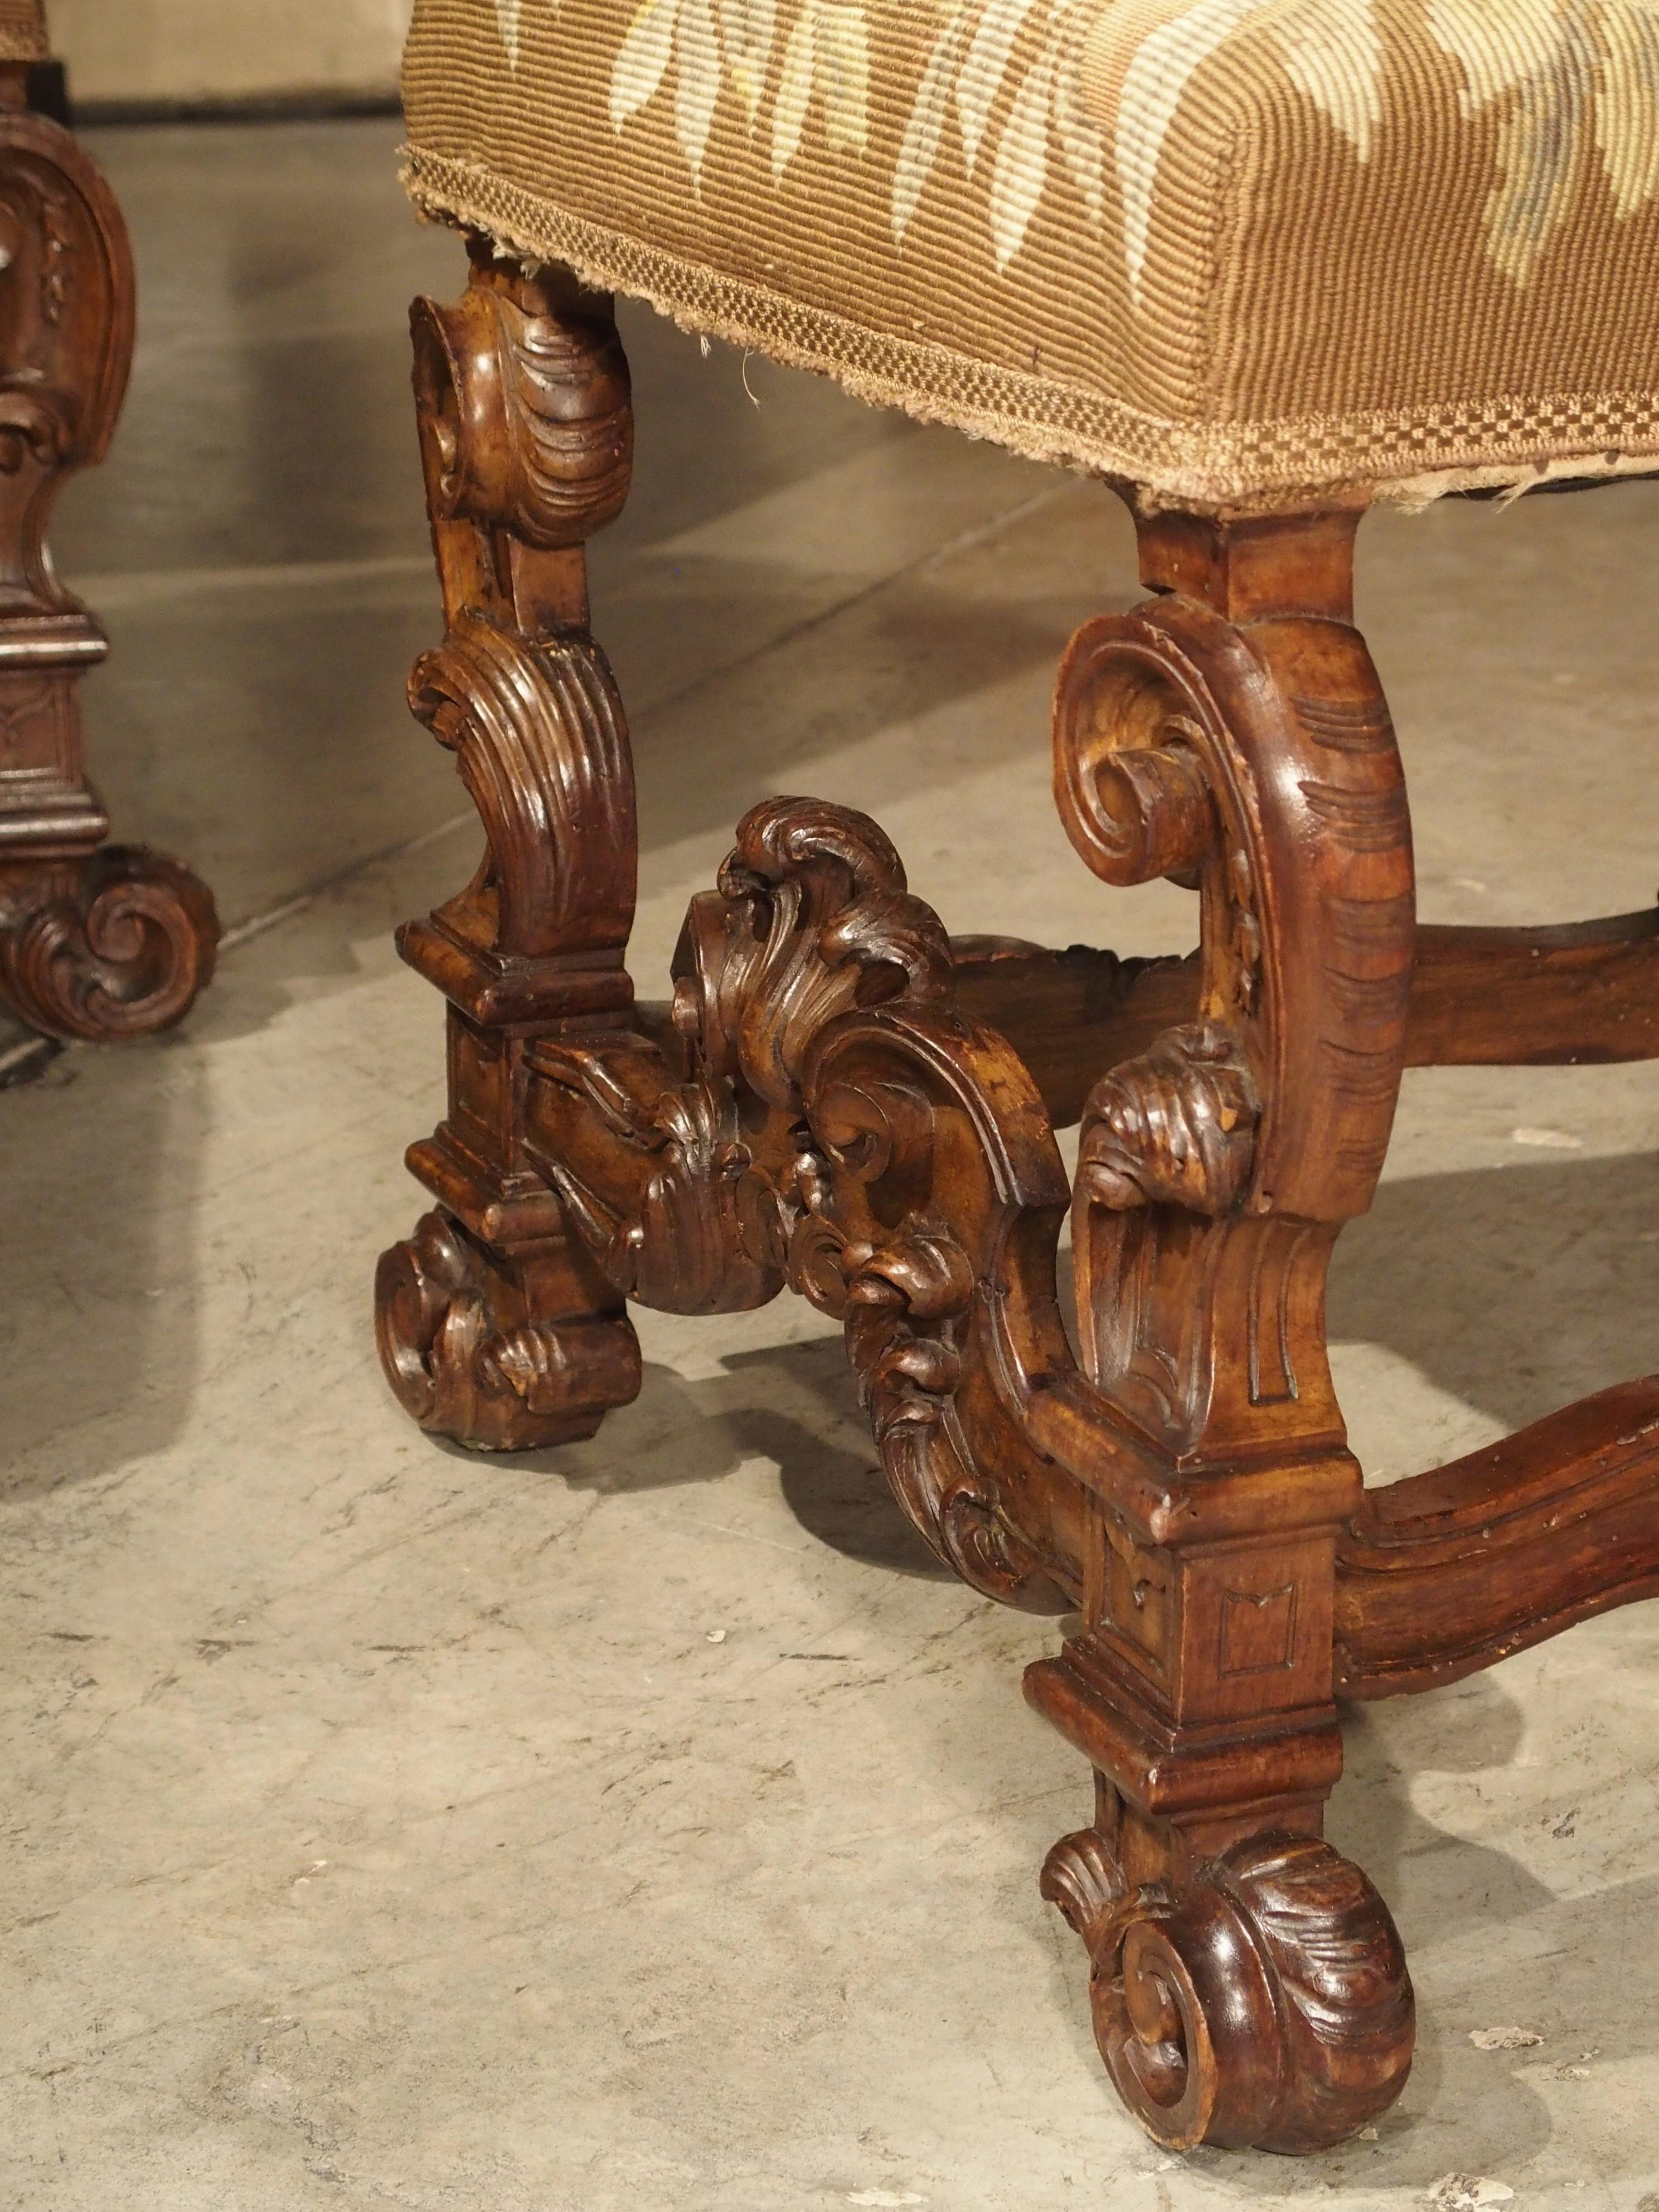 This group of 6 side chairs were carved from walnut wood in the latter half of the 1800s. They are from the Italian region of Lombardy, which has long been a global center for banking and fashion. The design of the chairs is in the style of the late